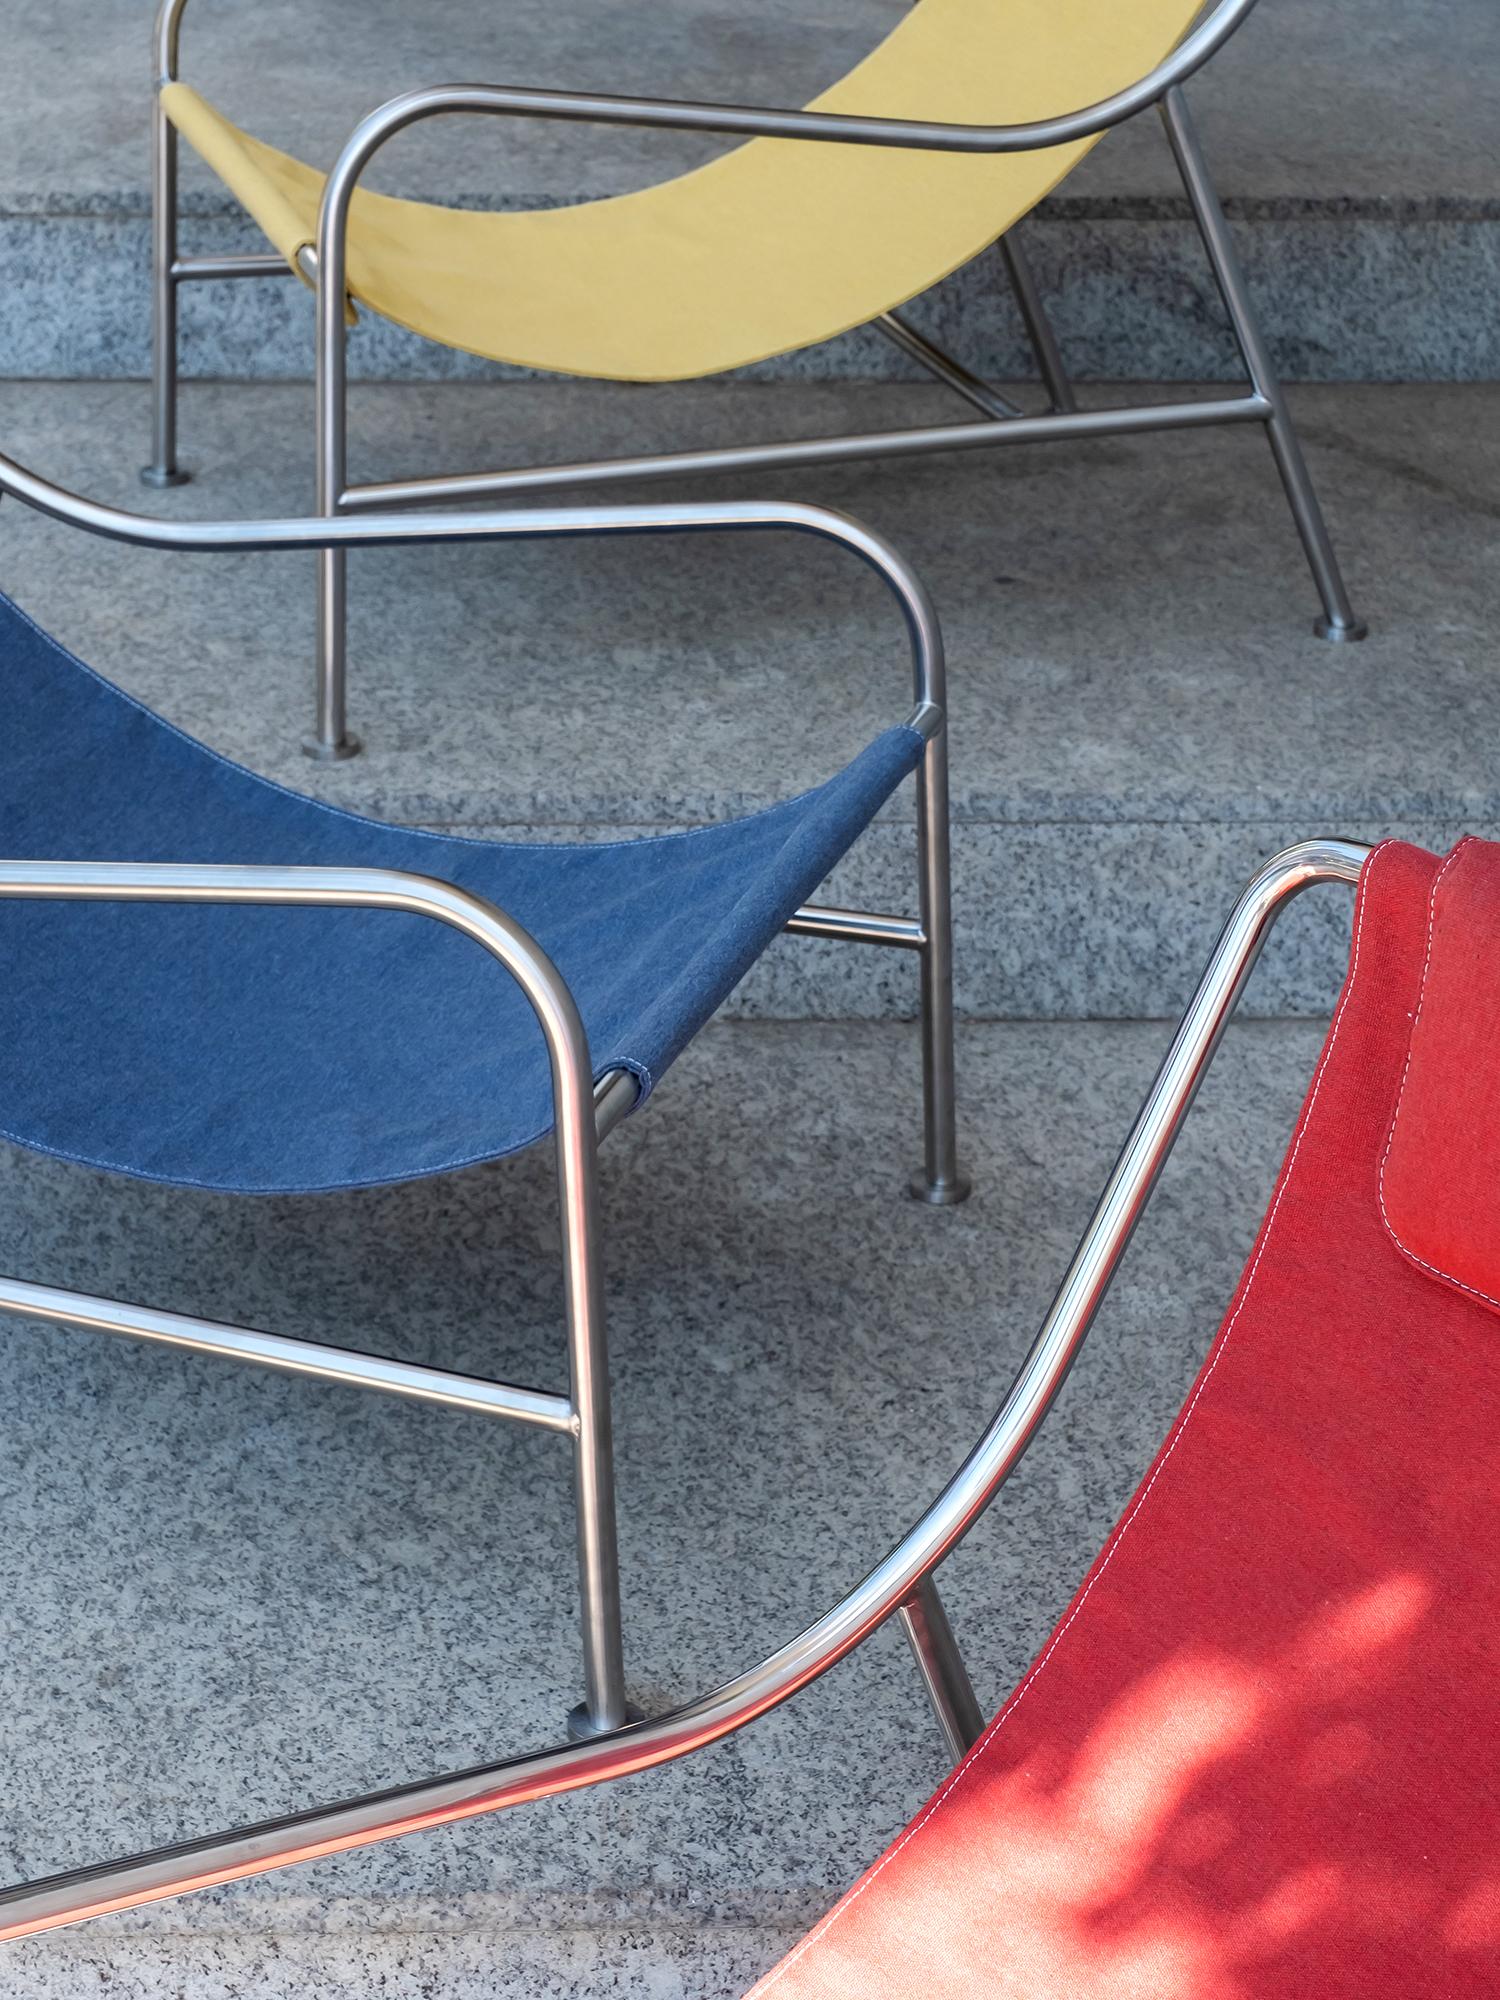 Embracing the purpose to take a break outside, the outdoor version of the LISBOA lounge chair invites you to just sit and relax under the sun, enjoying the long days and warm summer nights. 

Designed to live outdoors, the chair is very light due